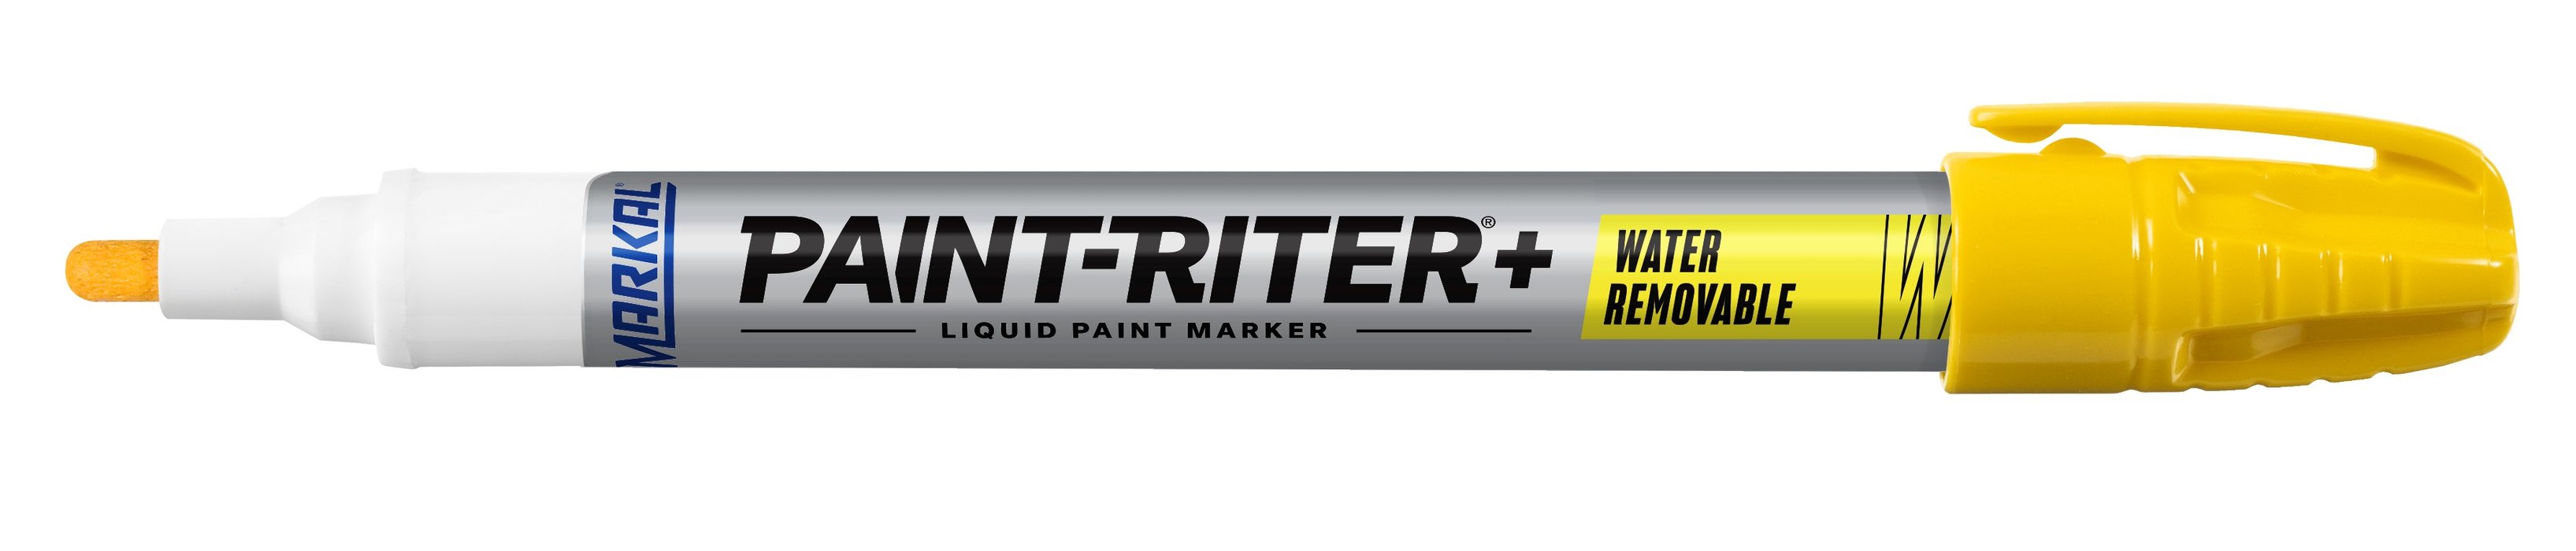 PAINT-RITER+ WATER REMOVABLE